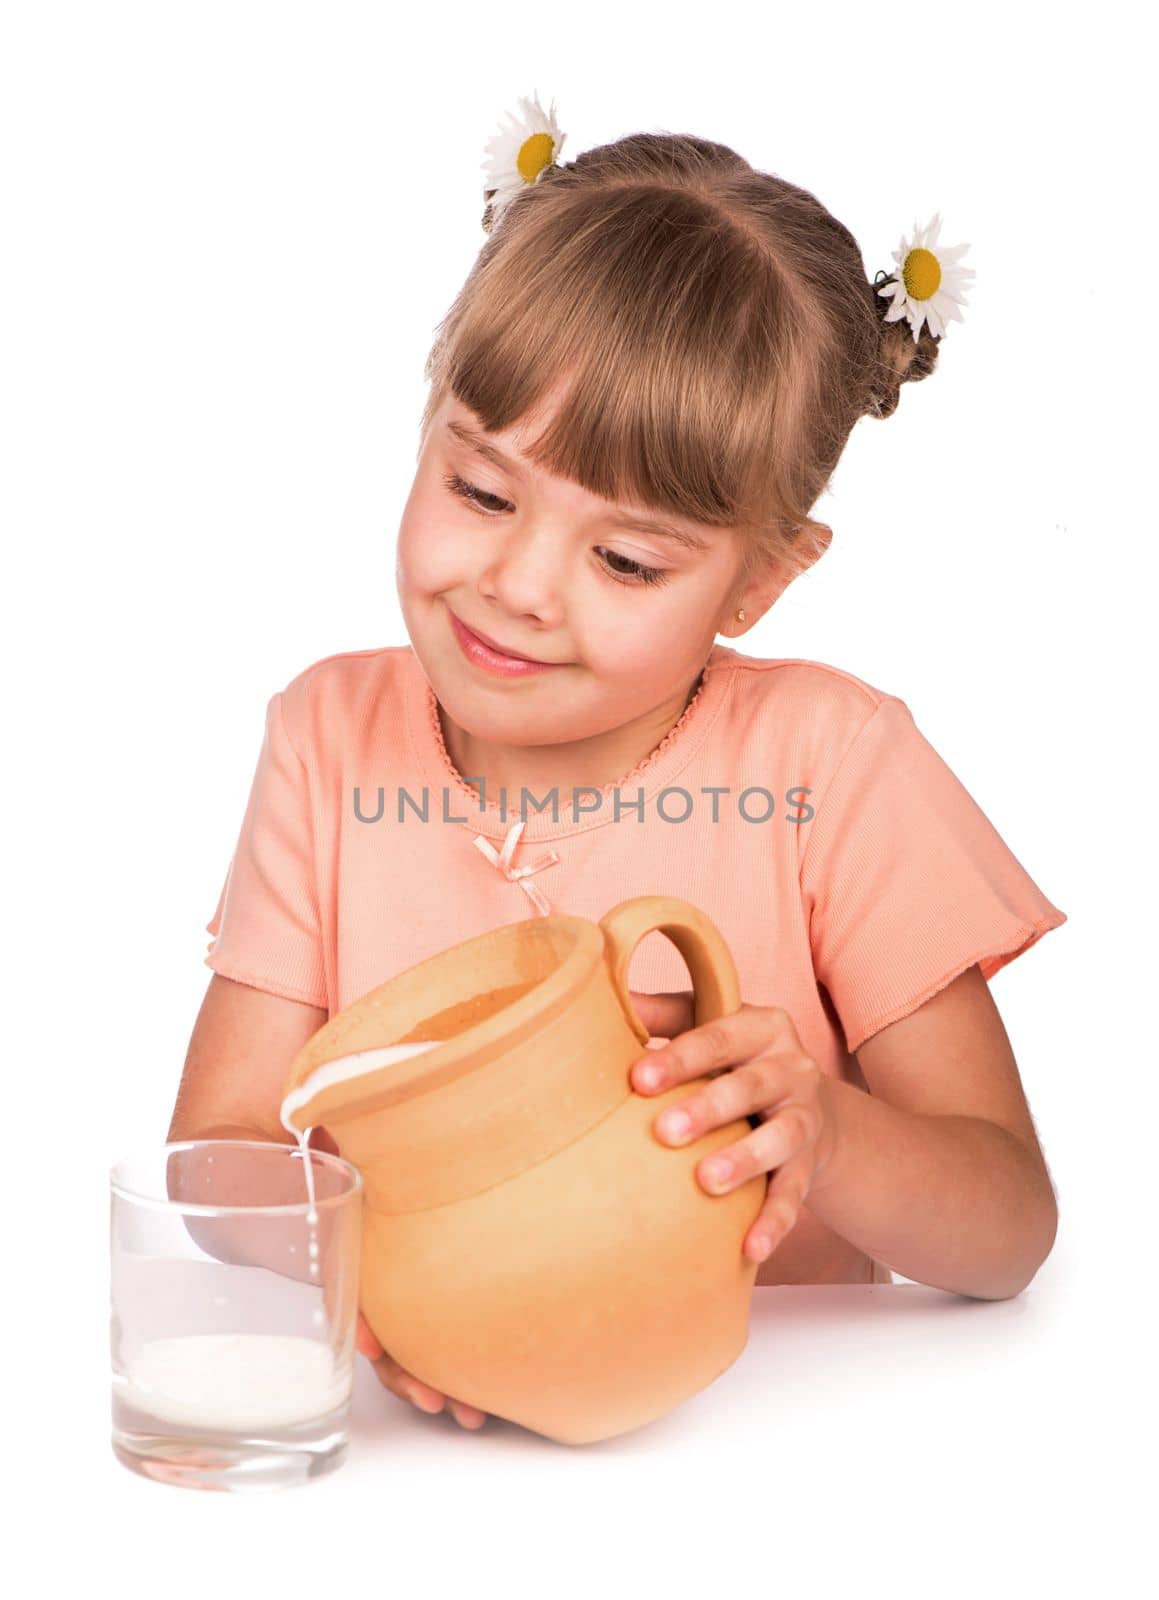 a girl in an orange T-shirt and flowers in her hair pours fresh milk from a jug on a white background by aprilphoto